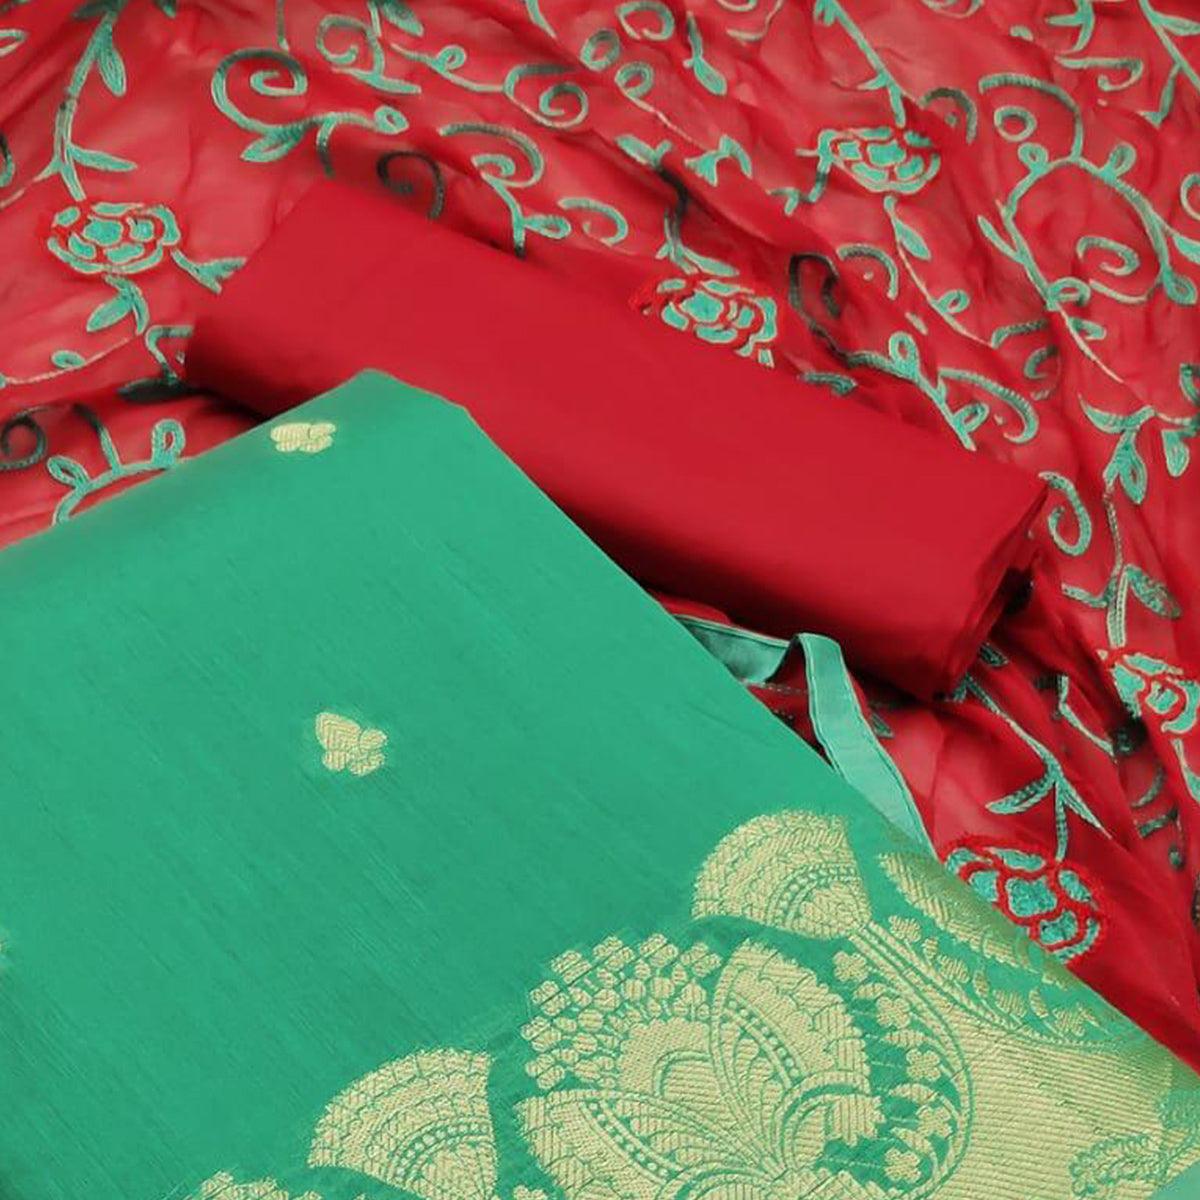 Exceptional Turquoise Green Colored Casual Wear Woven Banarasi Silk Dress Material - Peachmode